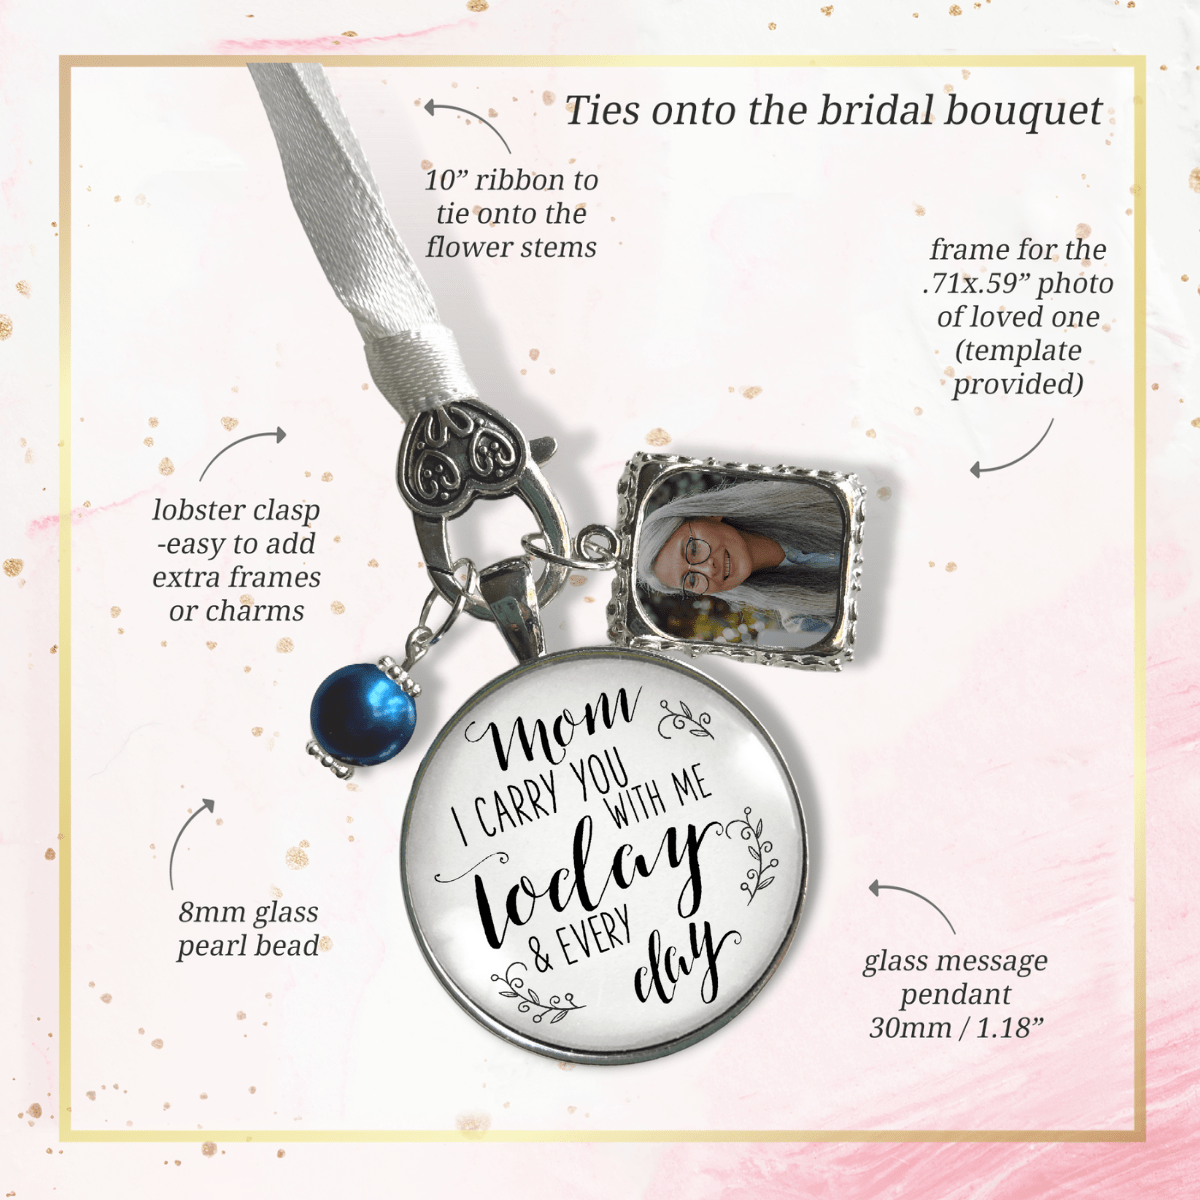 Bridal Bouquet Photo Charm Mom I Carry You Wedding White Silver Blue Bead - Gutsy Goodness;Bridal Bouquet Photo Charm Mom I Carry You Wedding White Silver Blue Bead - Gutsy Goodness Handmade Jewelry Gifts